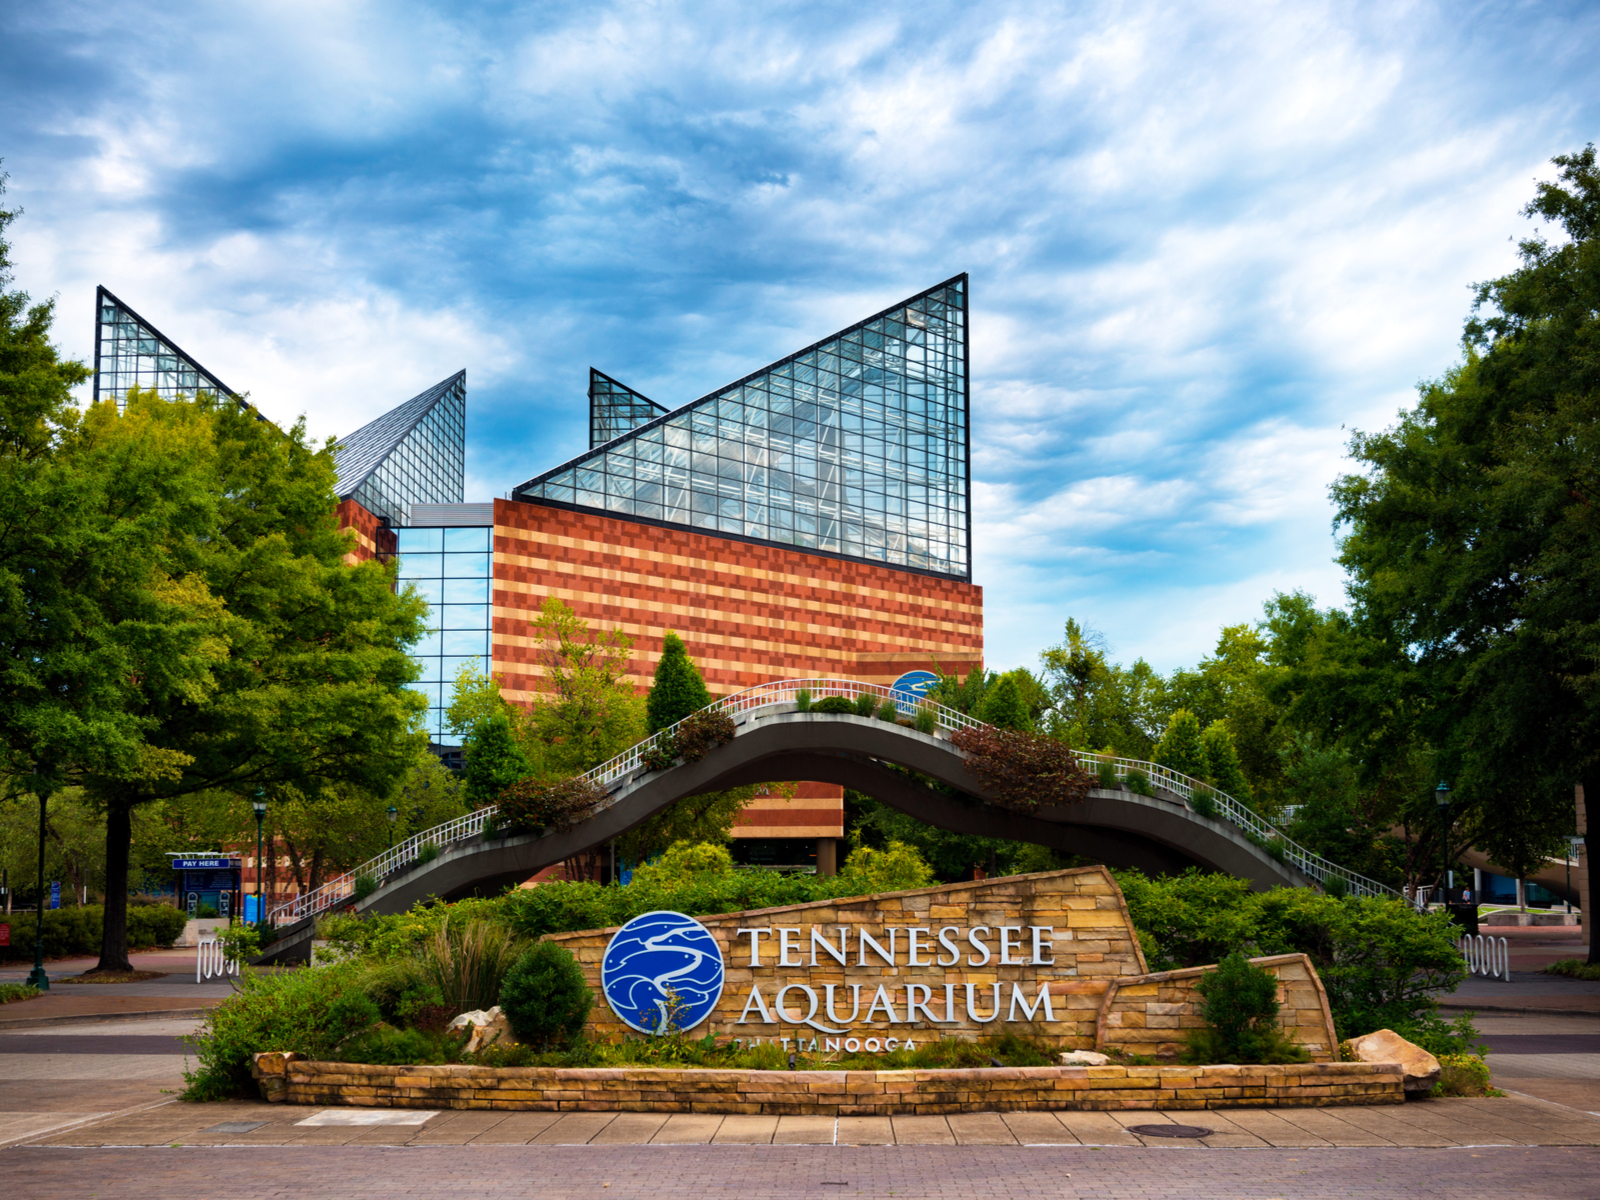 The Tennessee Aquarium is one of the best things to do in Tennessee which houses thousands of animal species, pictured with its signage and facilities during a cloudy day